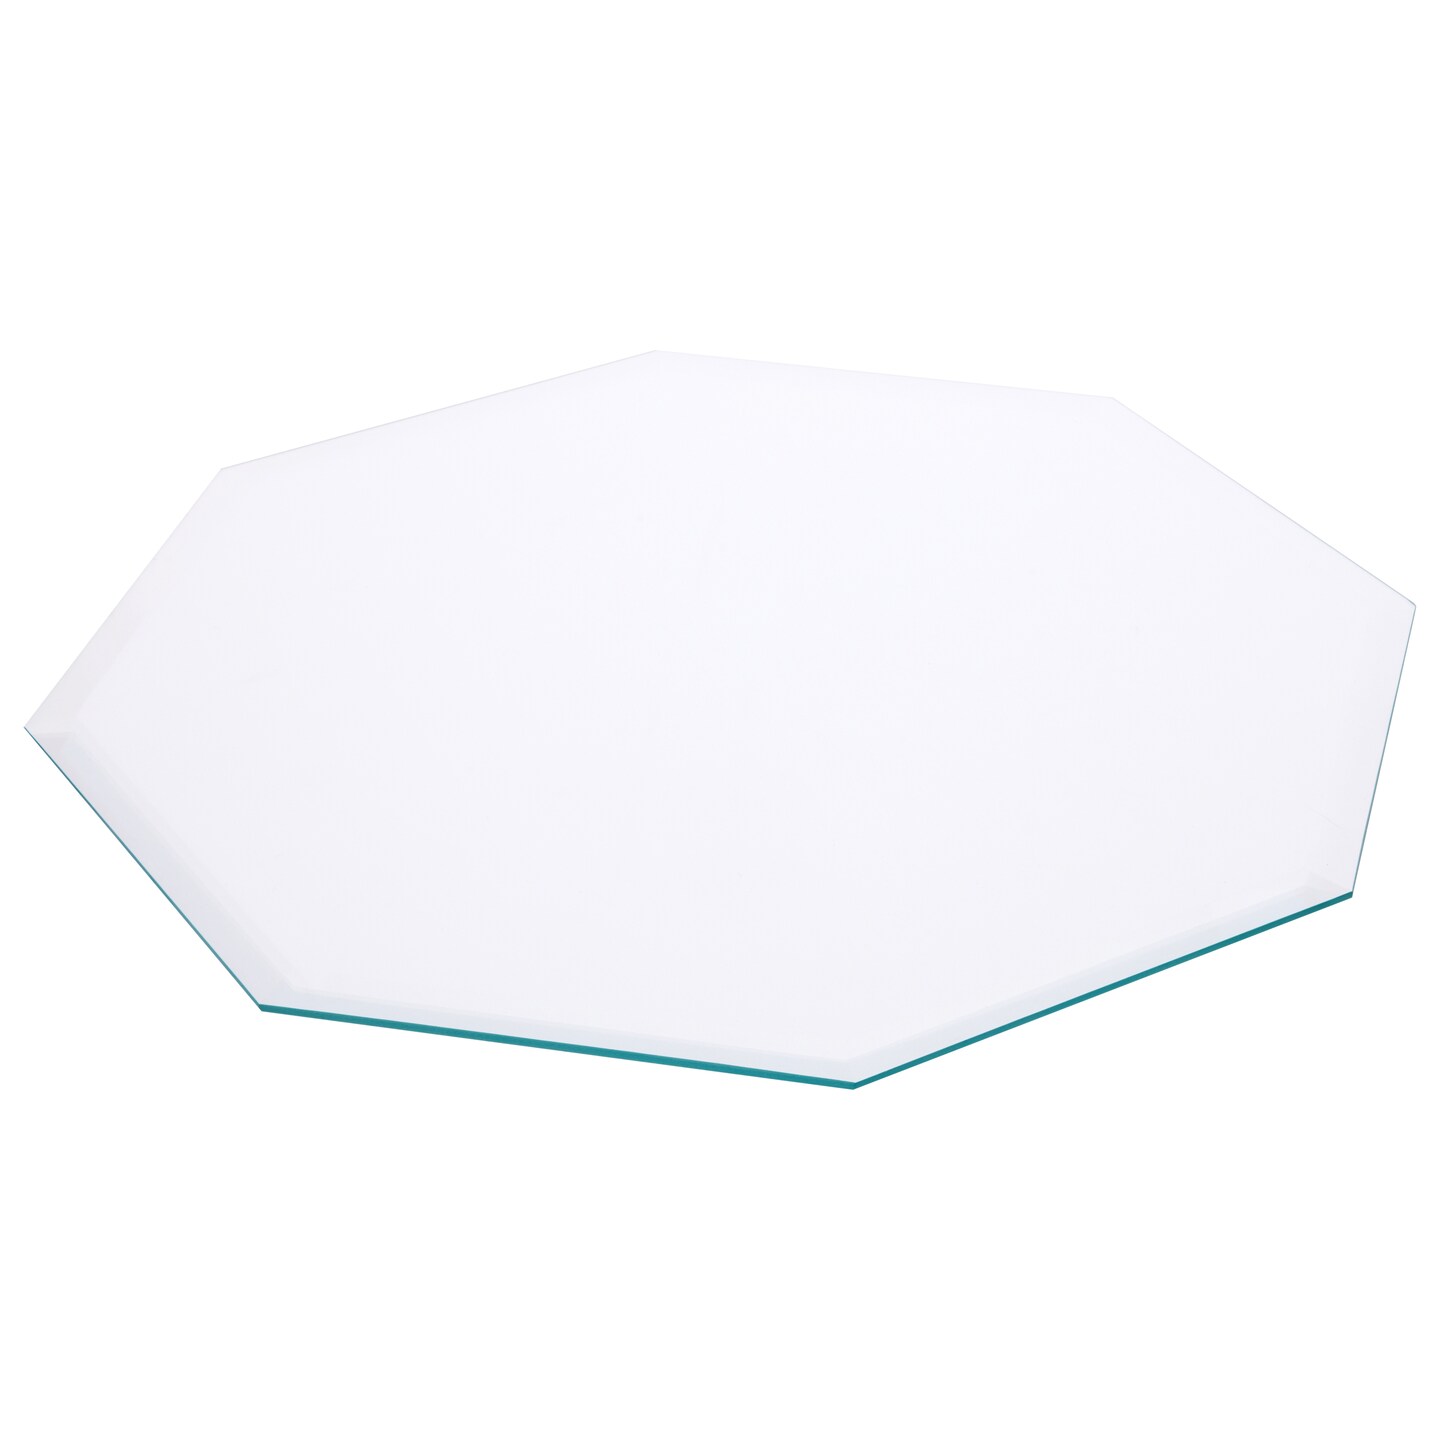 Plymor Octagon 5mm Beveled Clear Glass, 14 inch x 14 inch